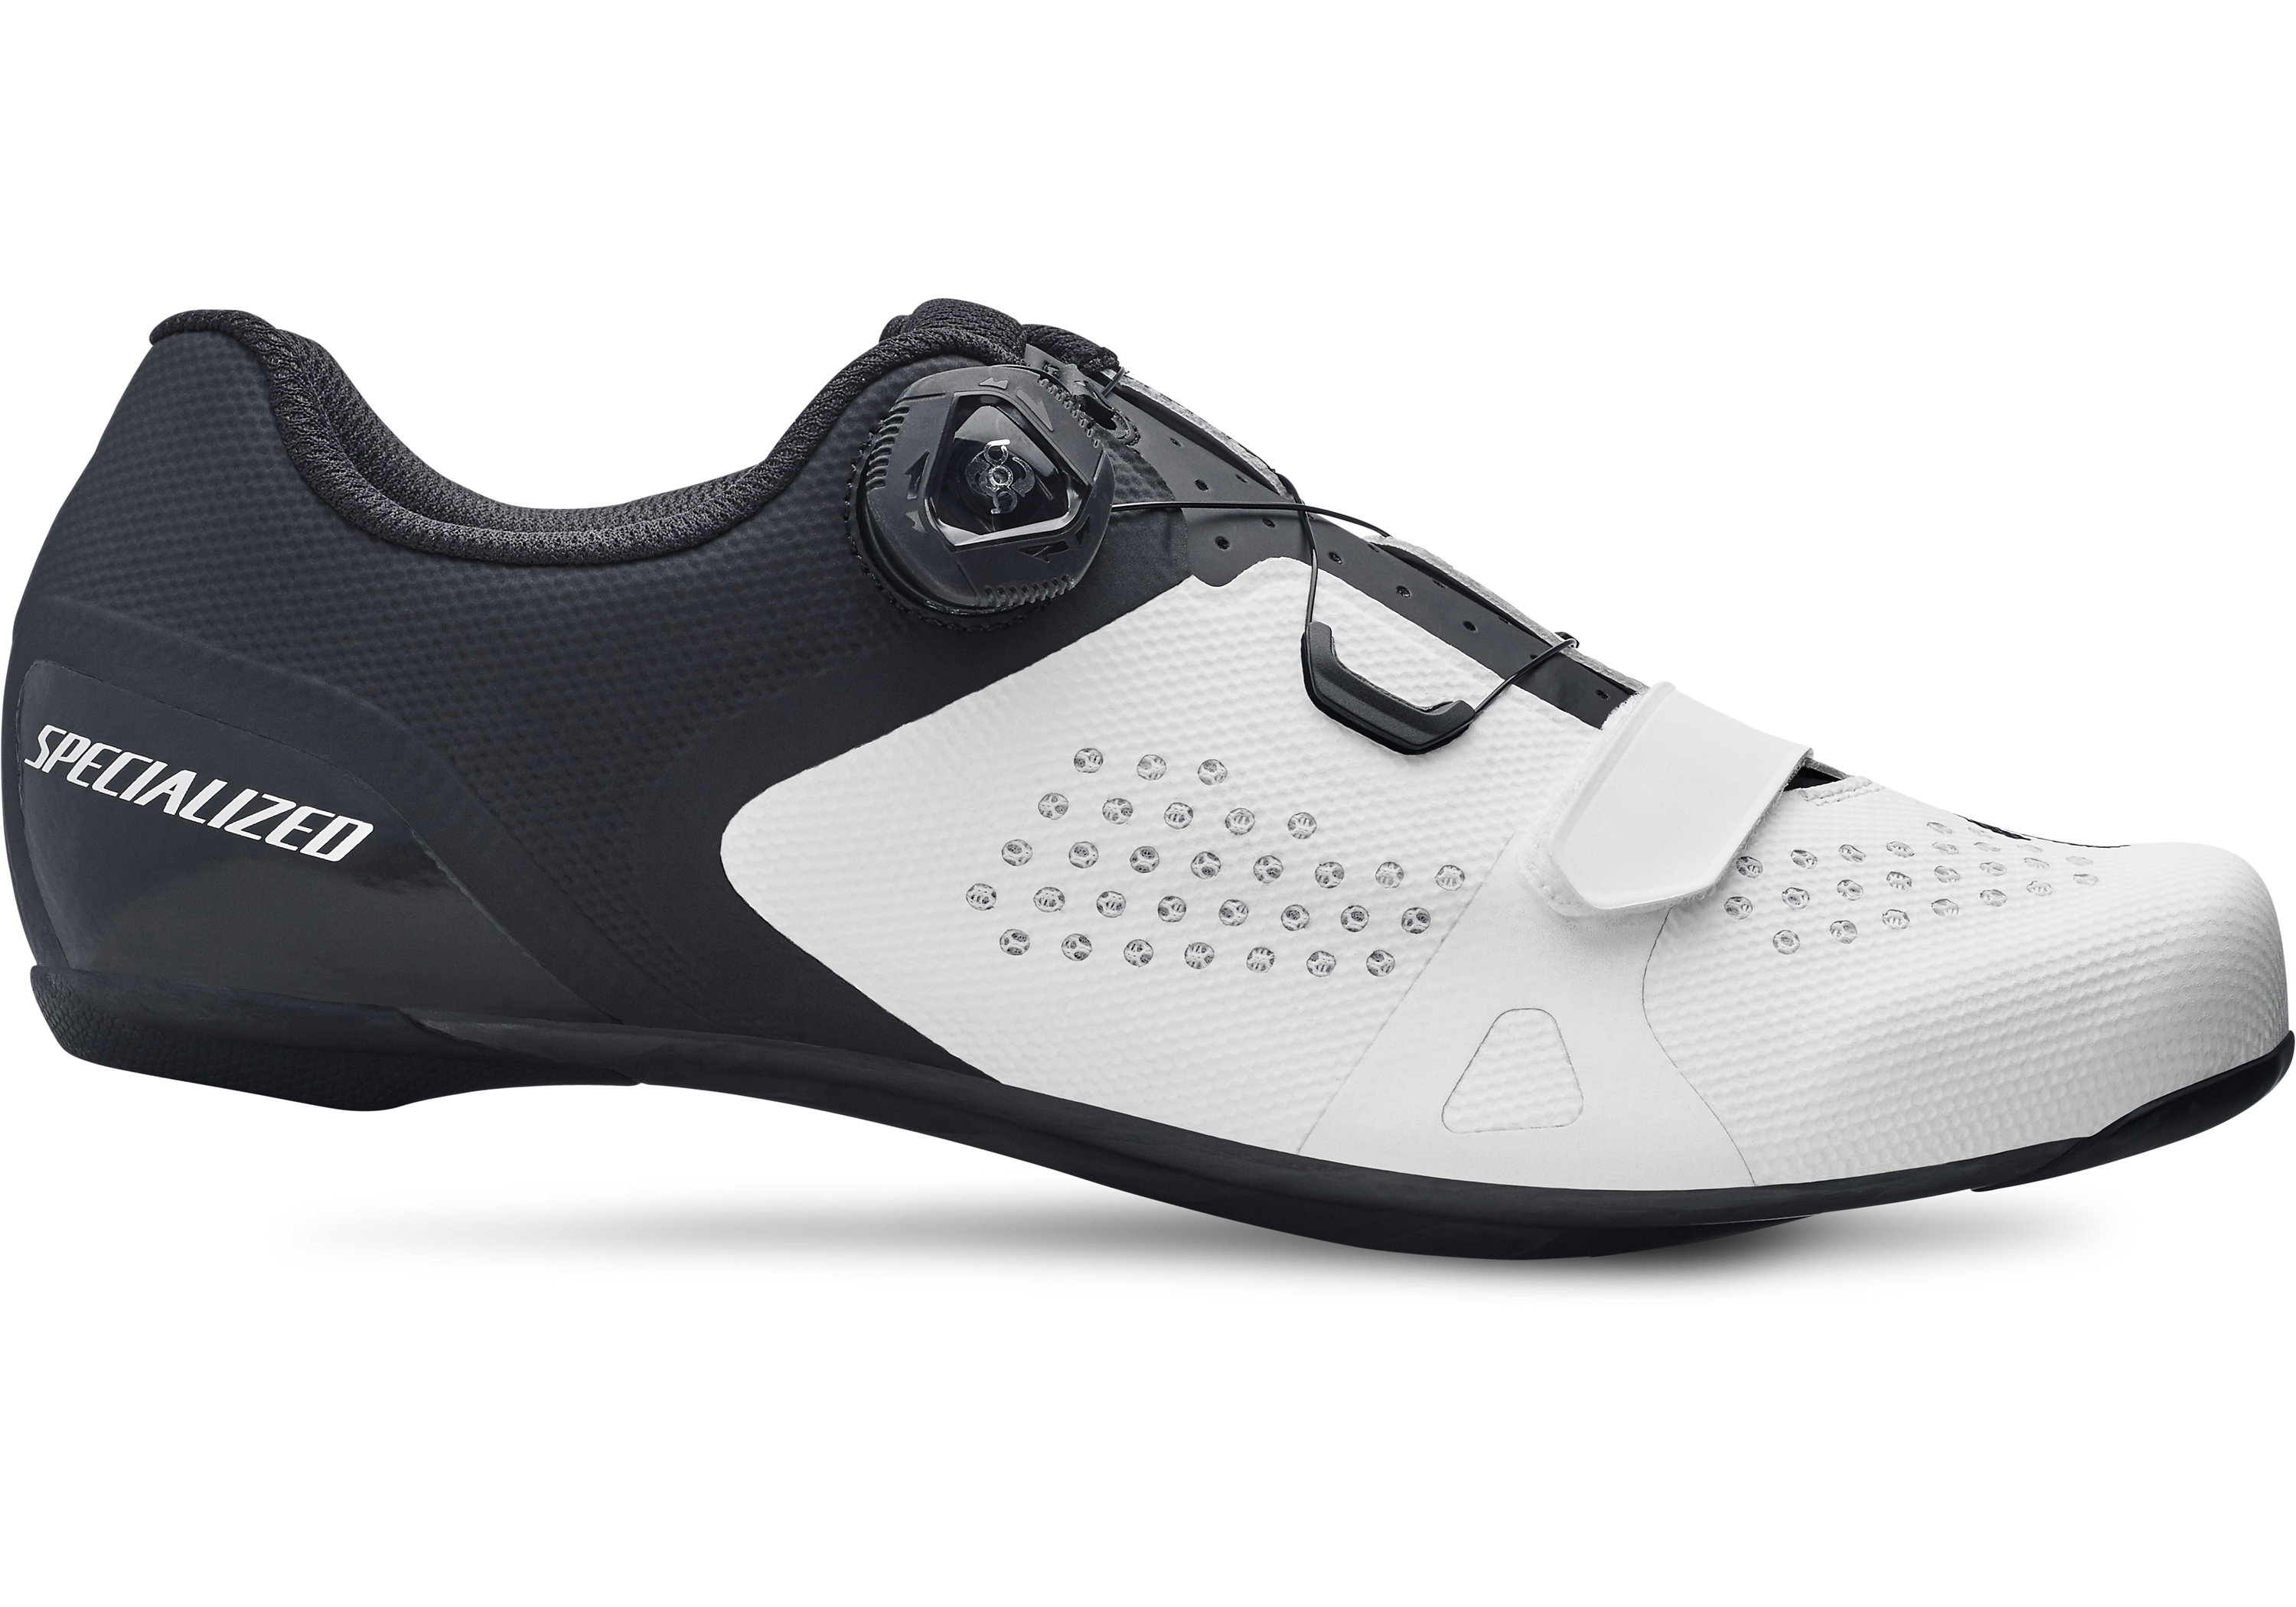 Велообувь Specialized TORCH 2.0 RD SHOE WHT 44.5 2020 61018-34445